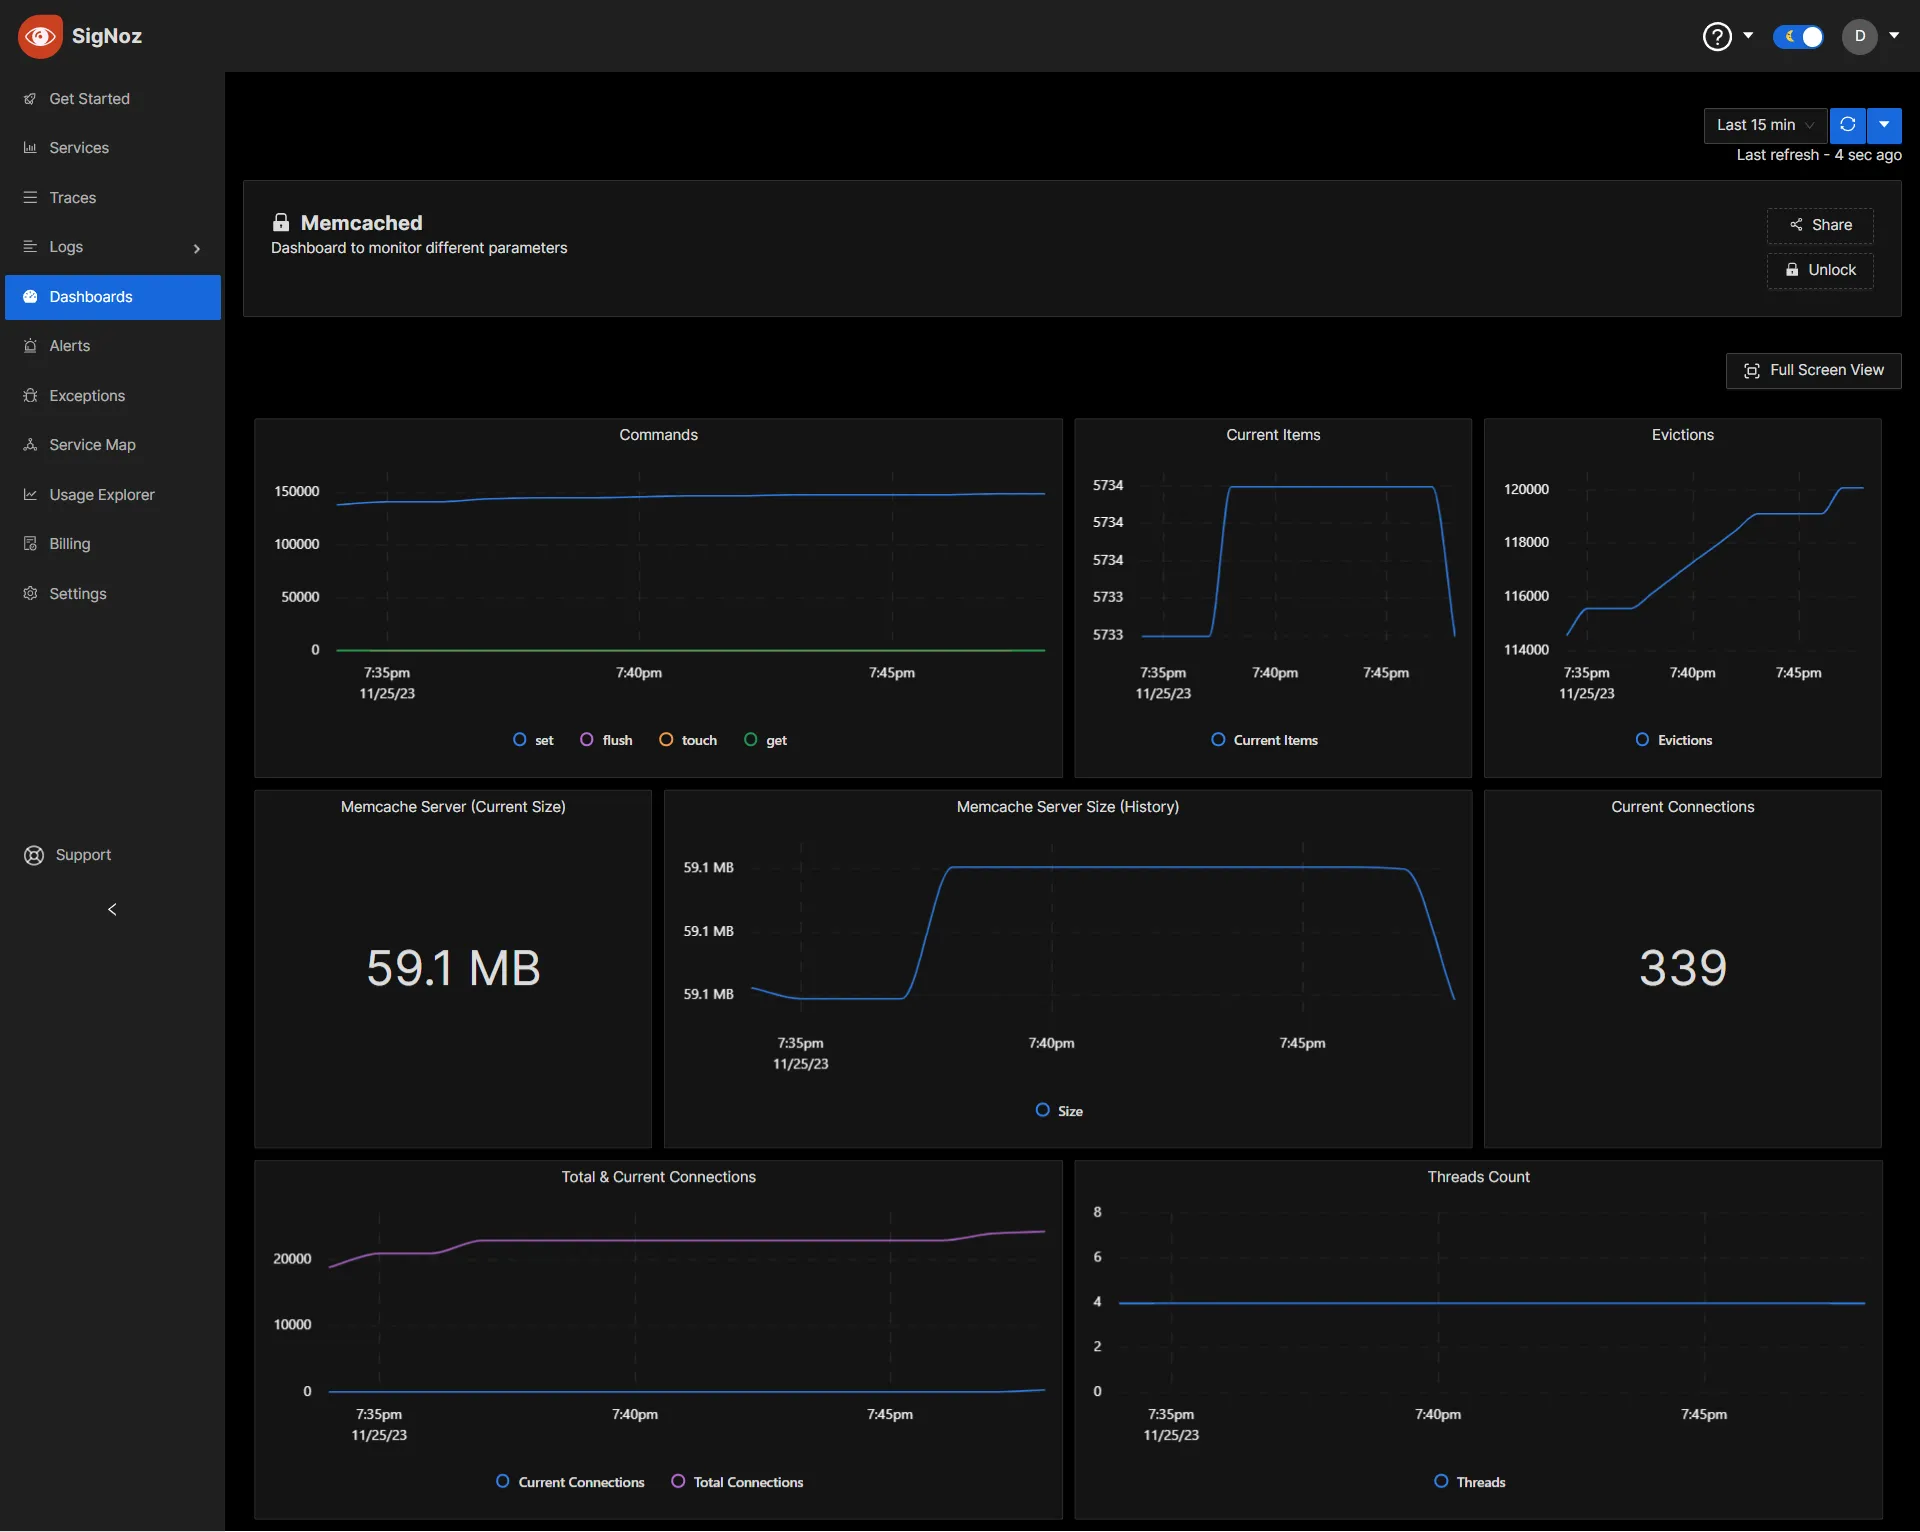 Memcached Monitoring Dashboard in SigNoz